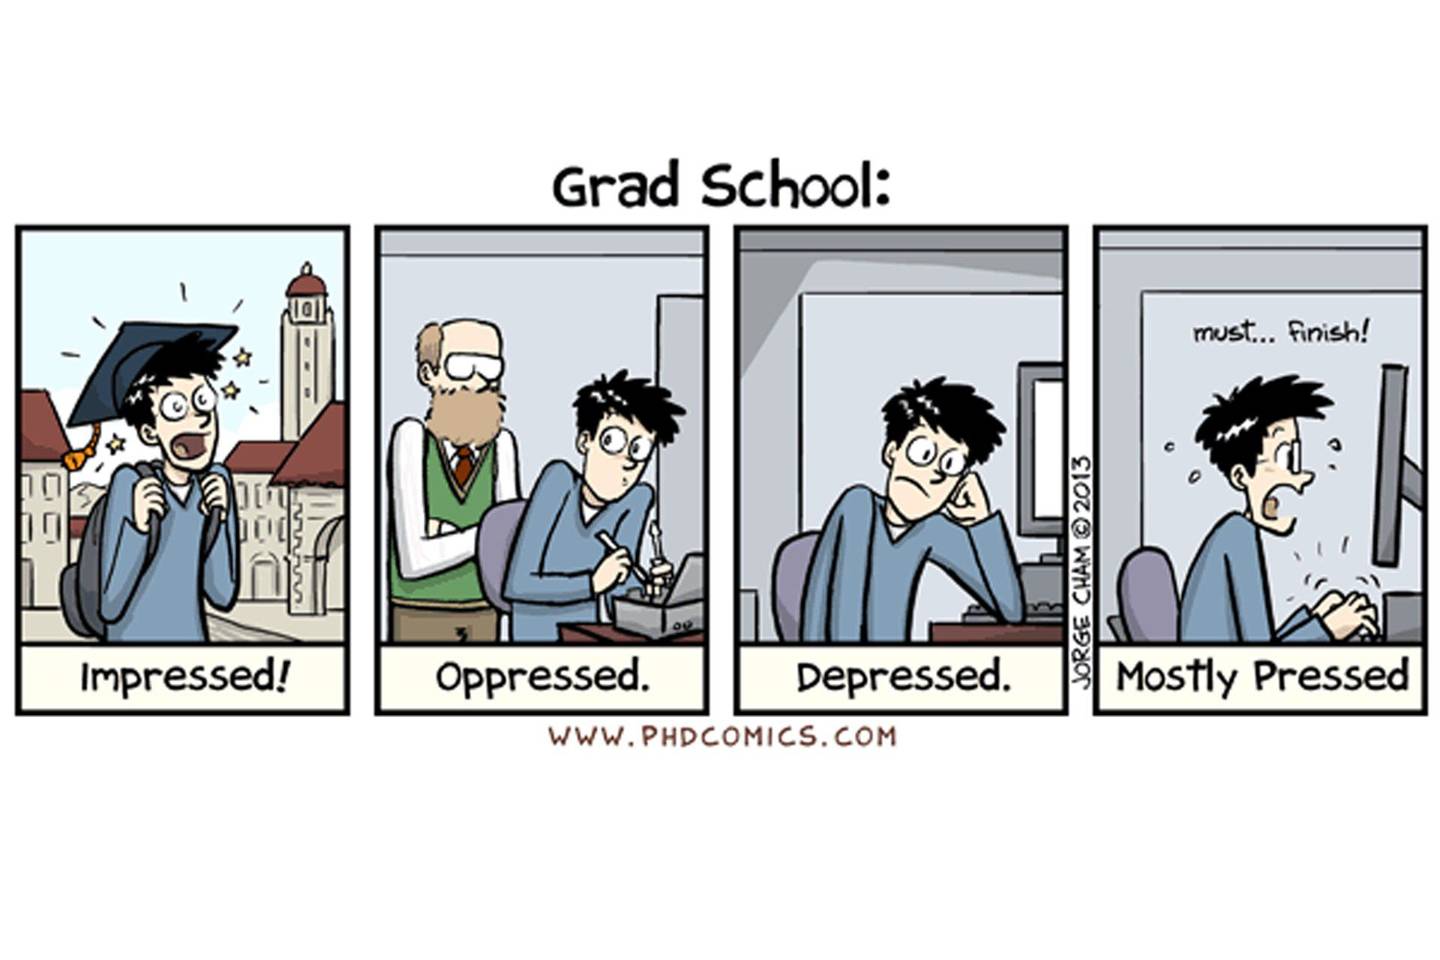 phd comics what is the thesis